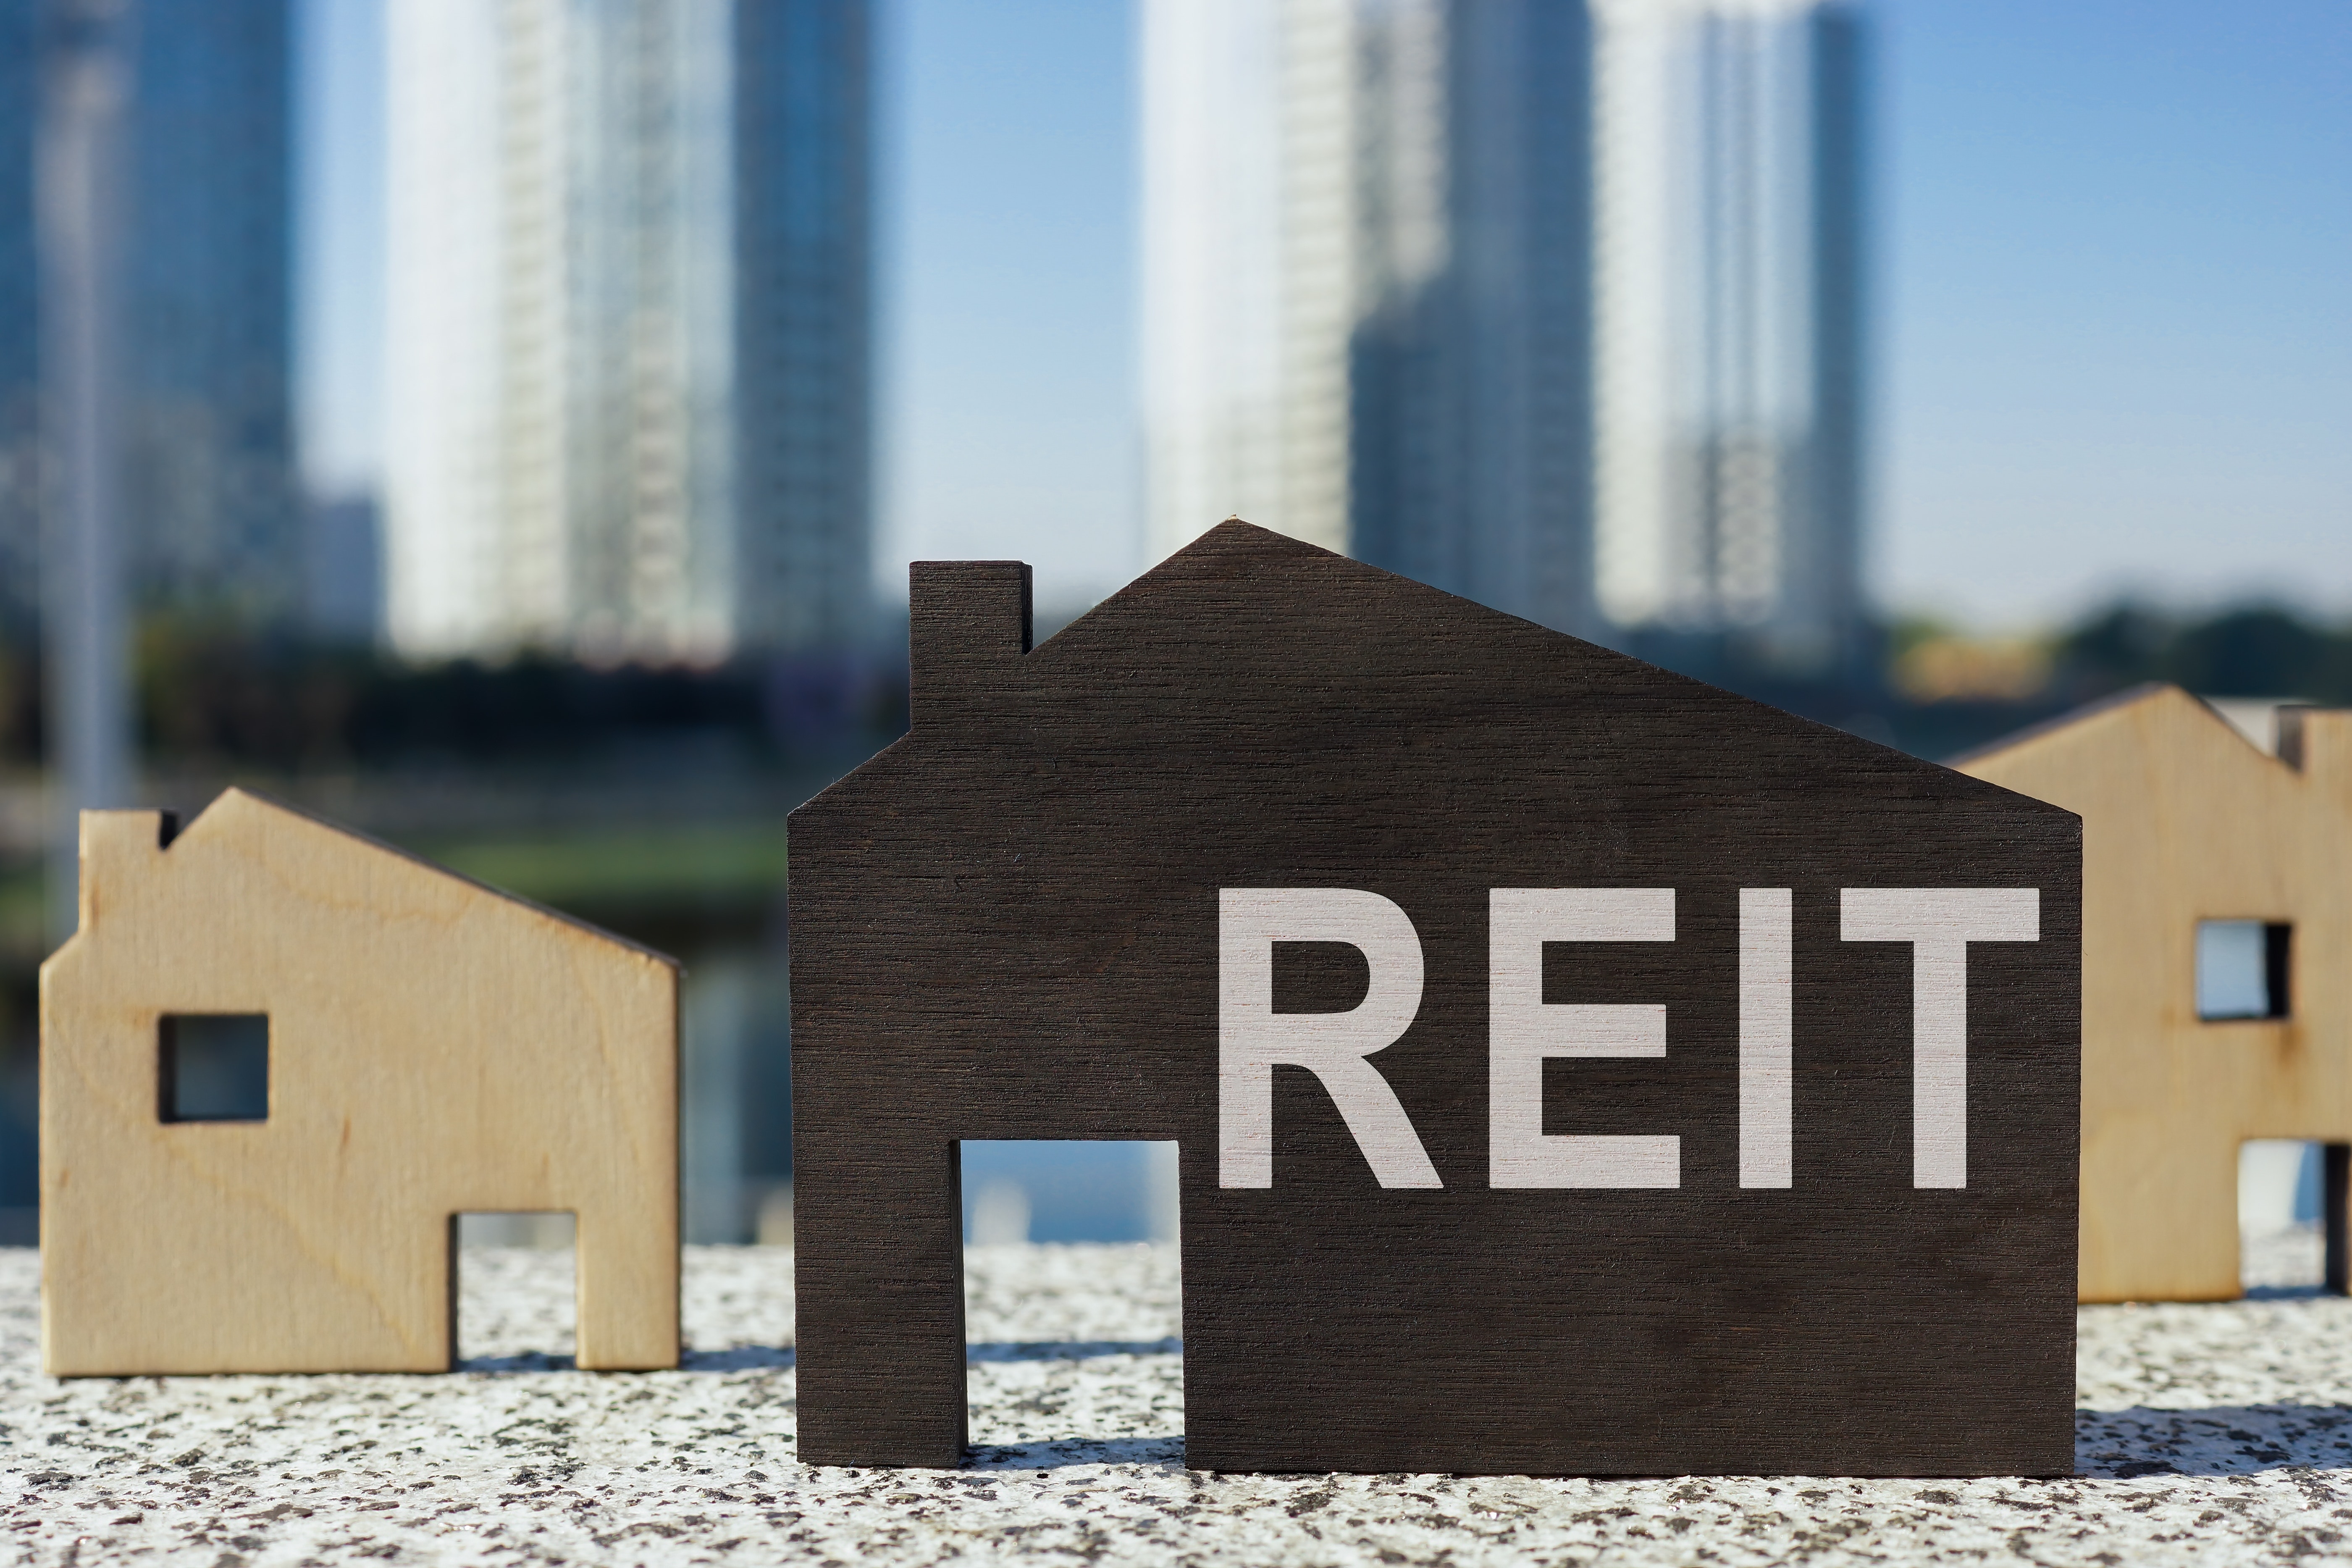 REITs Monday Action: Independence Realty Trust Up 2.65%